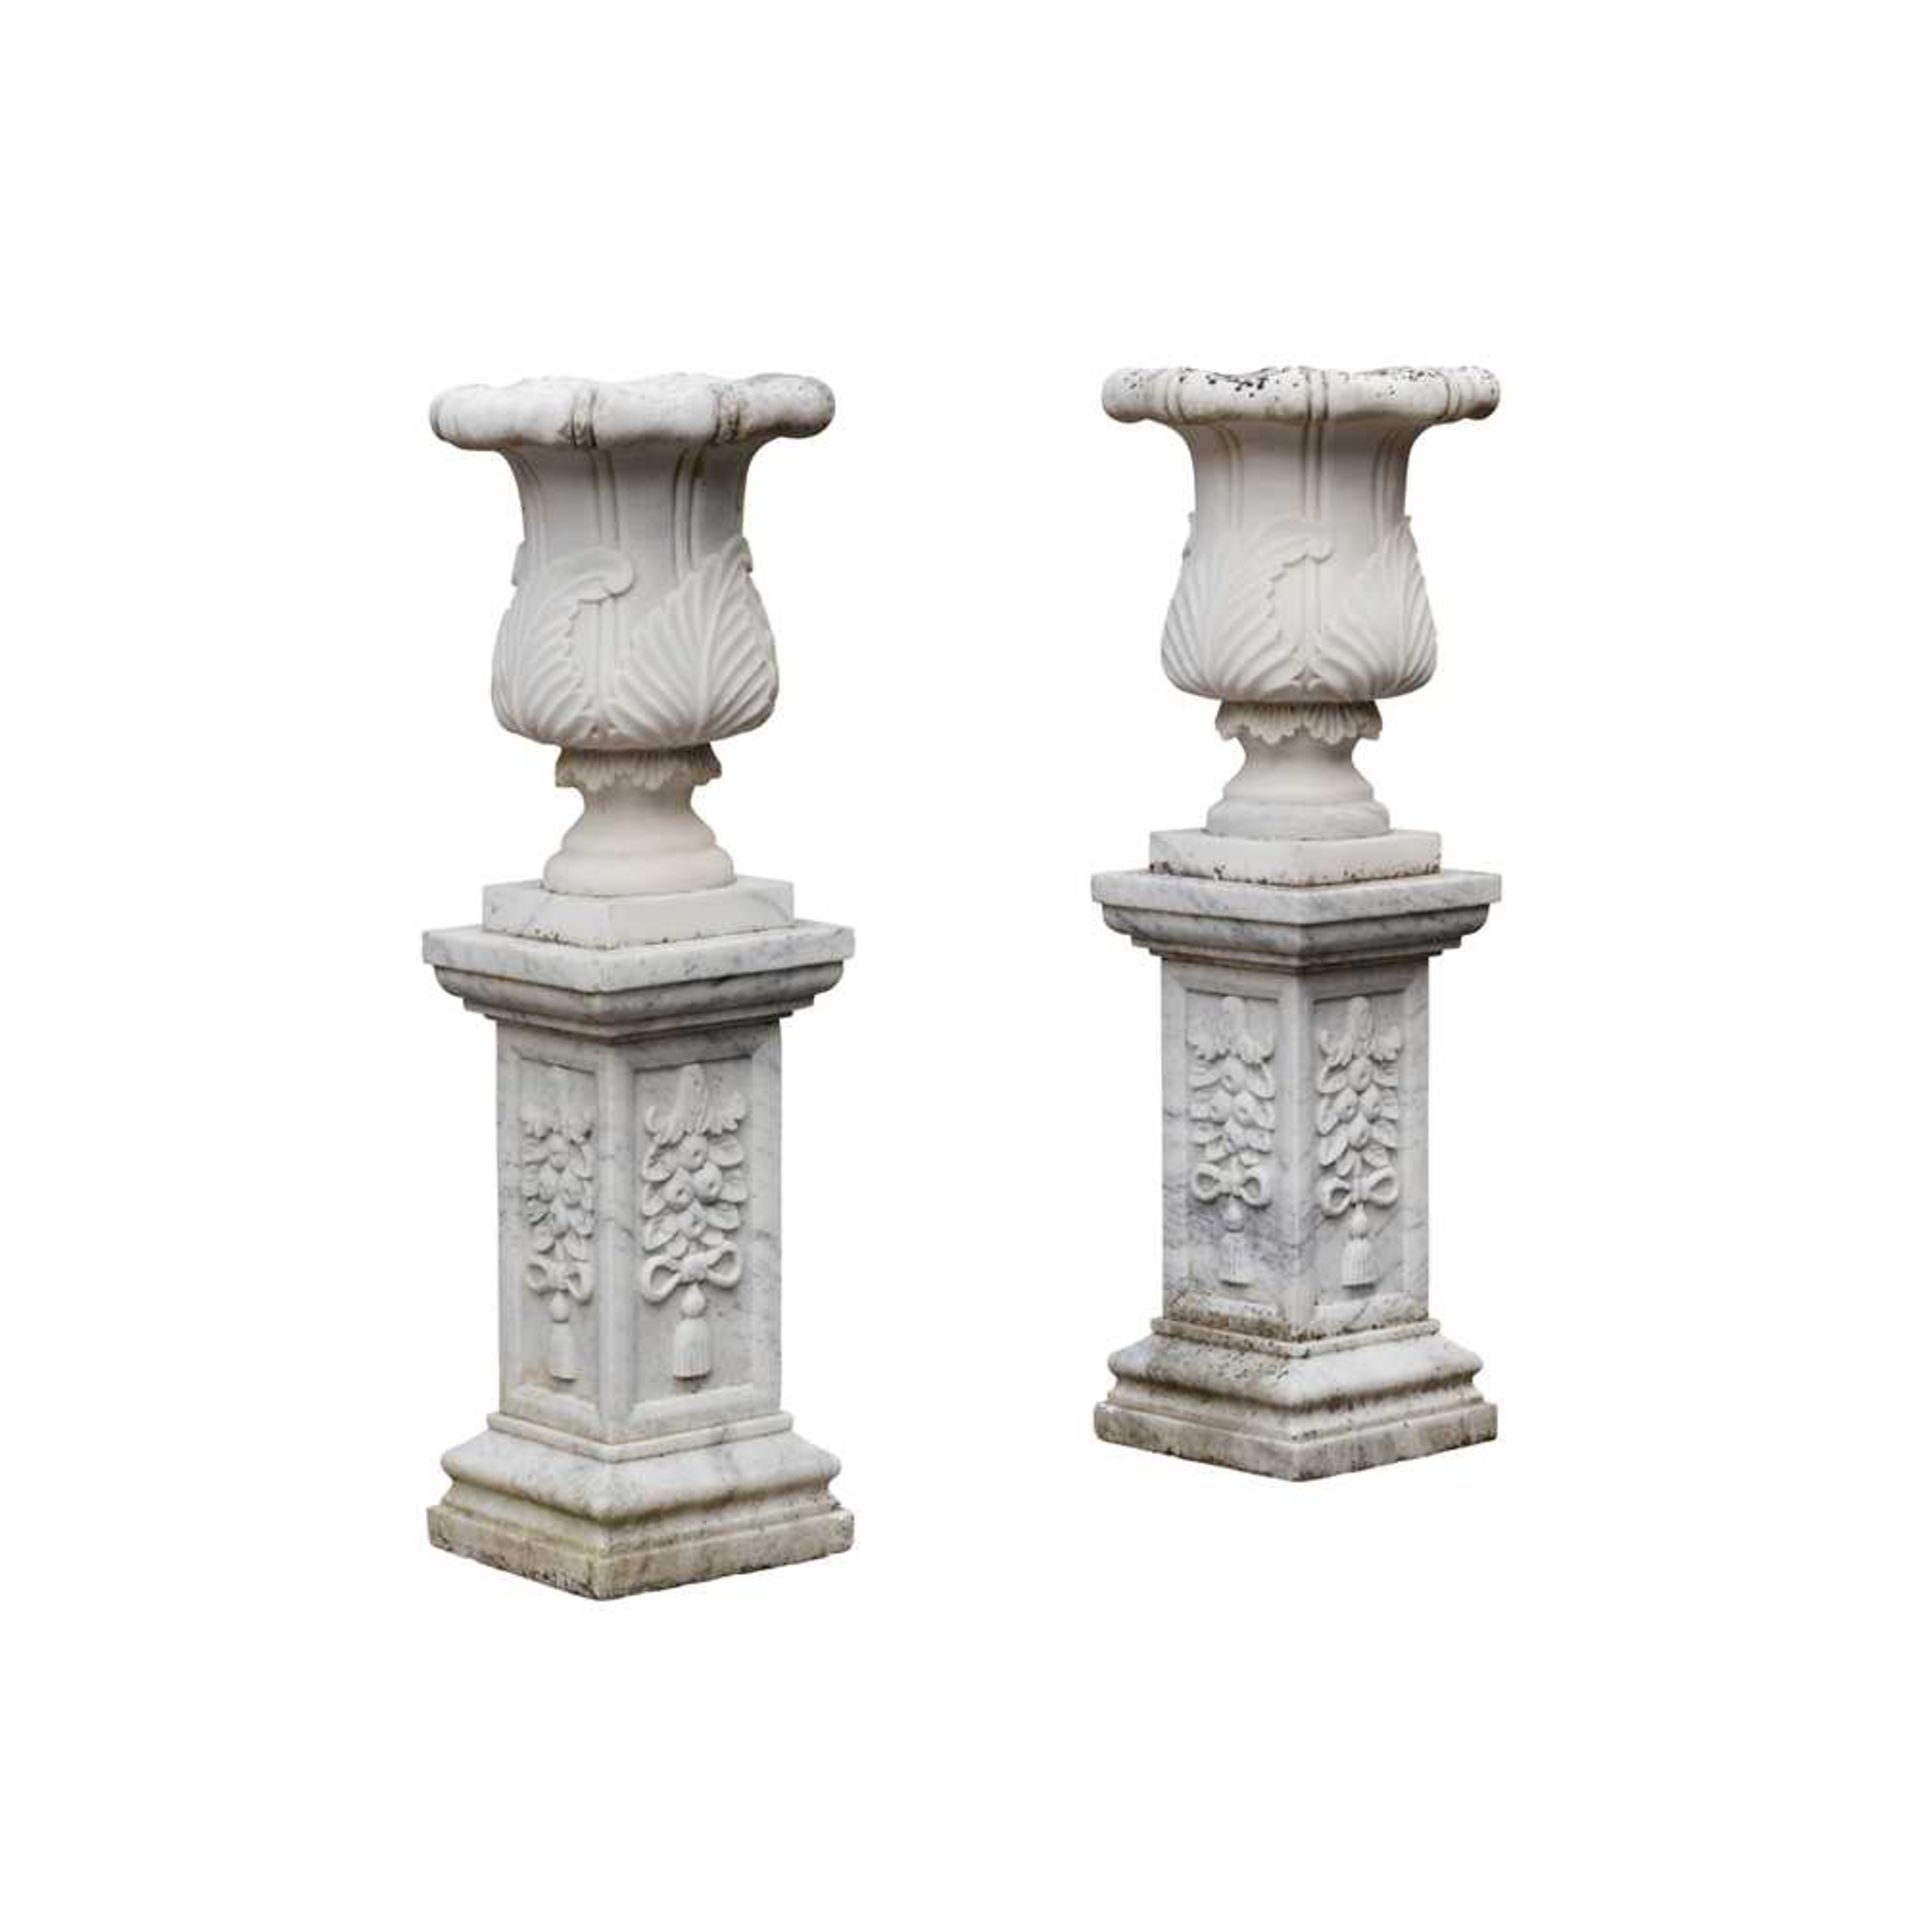 PAIR OF WHITE MARBLE URNS AND STANDS MODERN